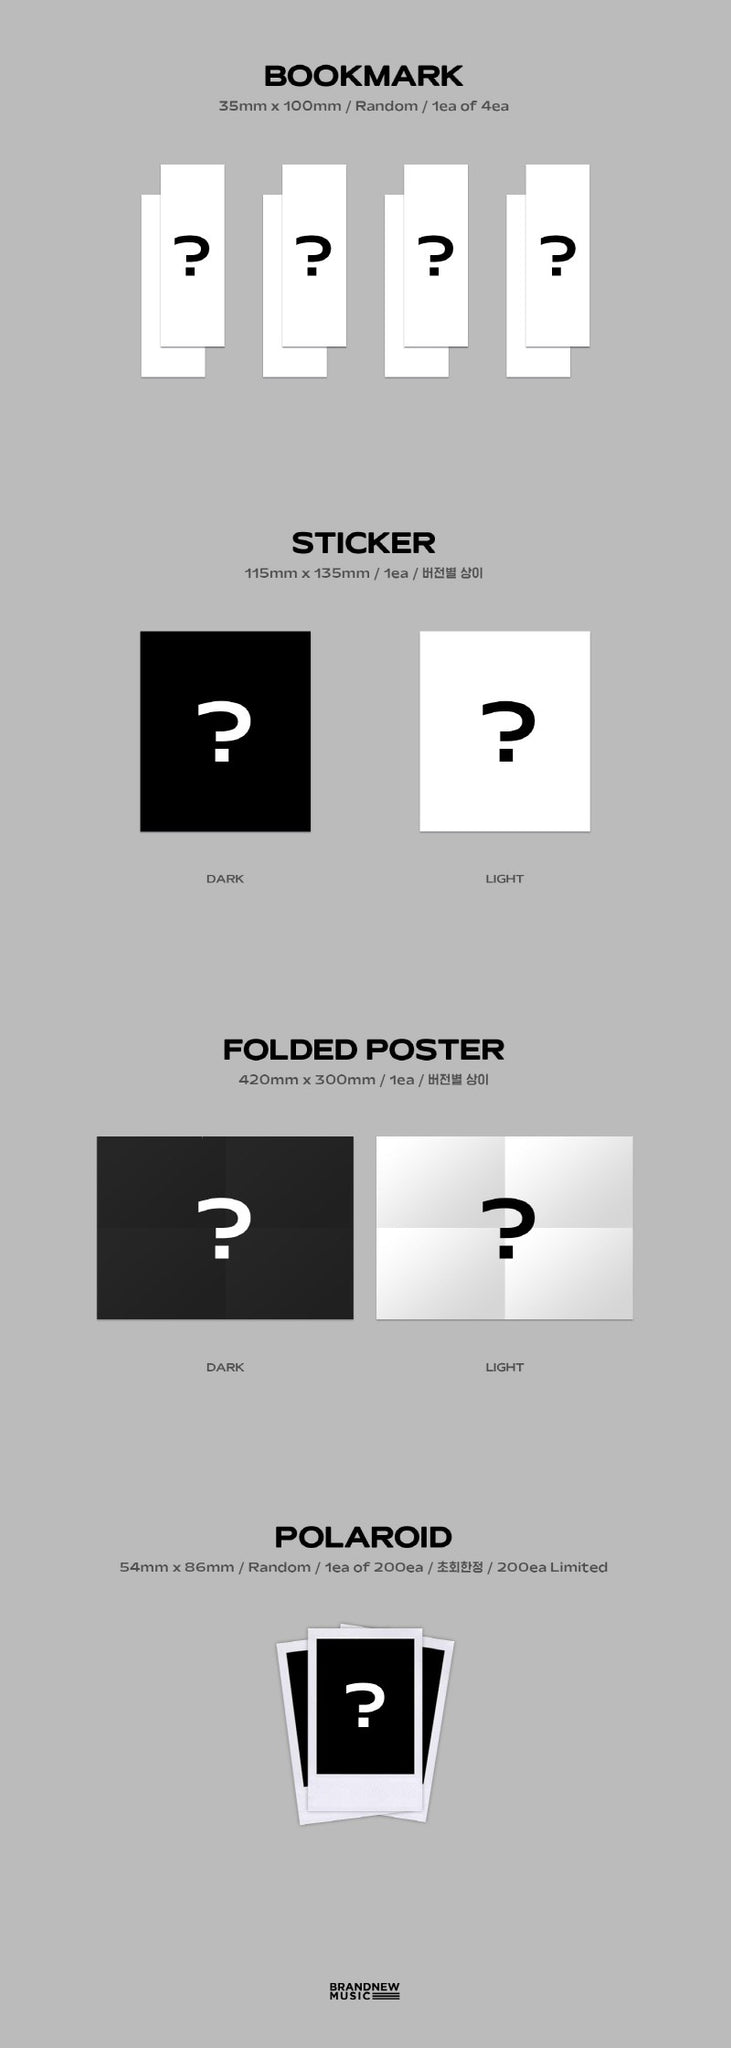 AB6IX THE FUTURE IS OURS : LOST Inclusions Bookmark Sticker Folded Poster 1st Press Only Polaroid